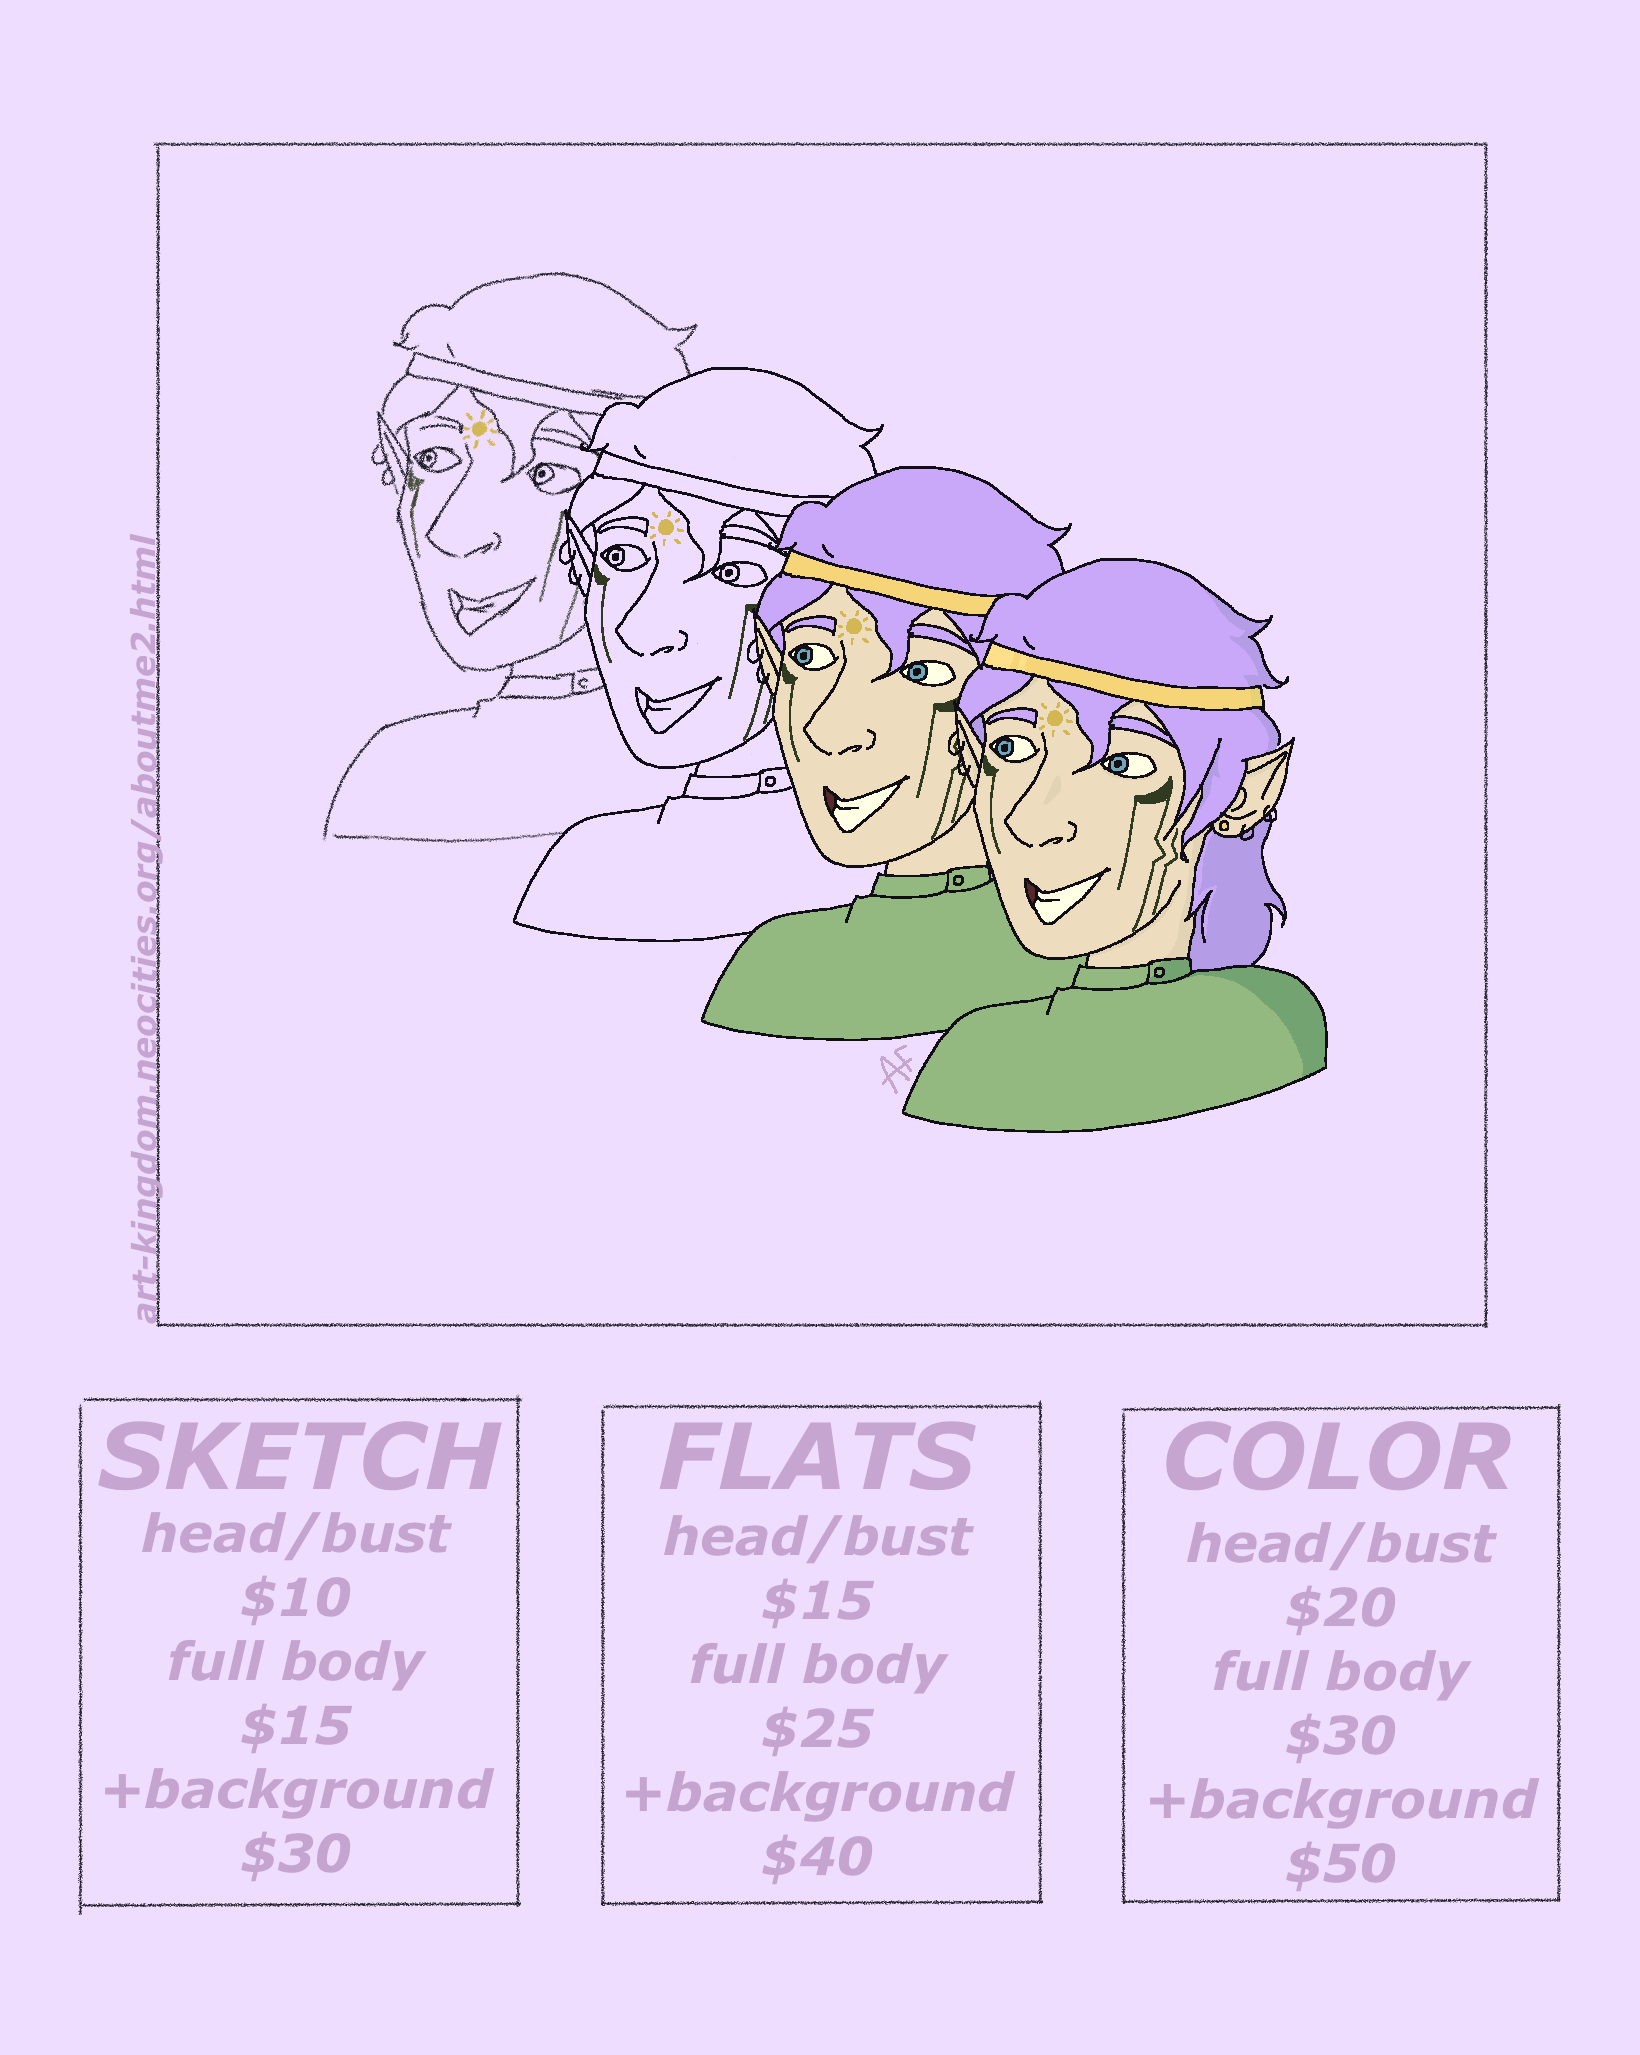 A box with three skinnier rectangles below it, giving an example of a drawing in sketch, lineart, colored, and shaded forms. The prices for a sketch are 10 USD for a bust, 15 USD for a full body, plus and 30 USD for something with a background. The prices for a drawing with flat colors are 15 USD for a bust, 25 USD for a full body, and 40 USD for something with a background. The prices for a shaded drawing are 20 USD for a bust, 30 USD for a full body, and 50 USD for something with a background.